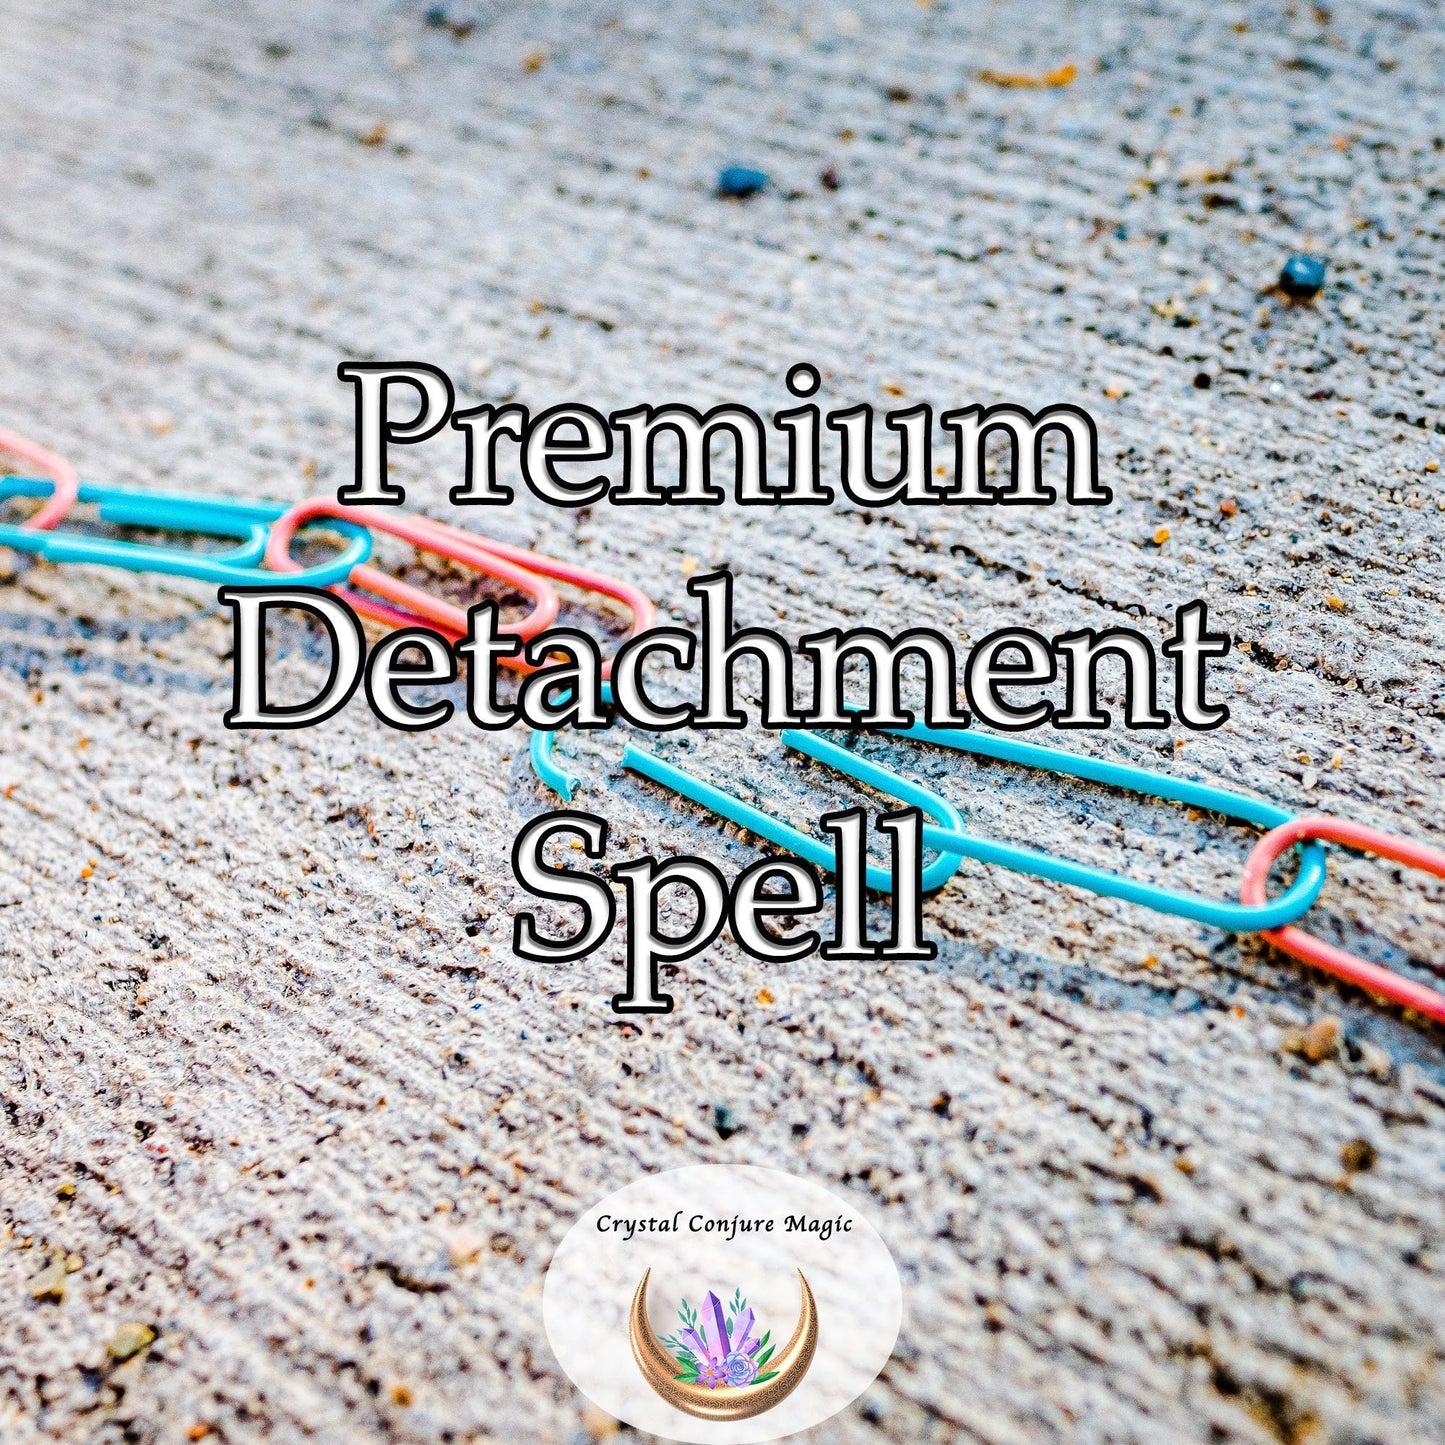 Premium Detachment Spell - break free from past relationships, rediscover your worth, and regain control of your emotional world